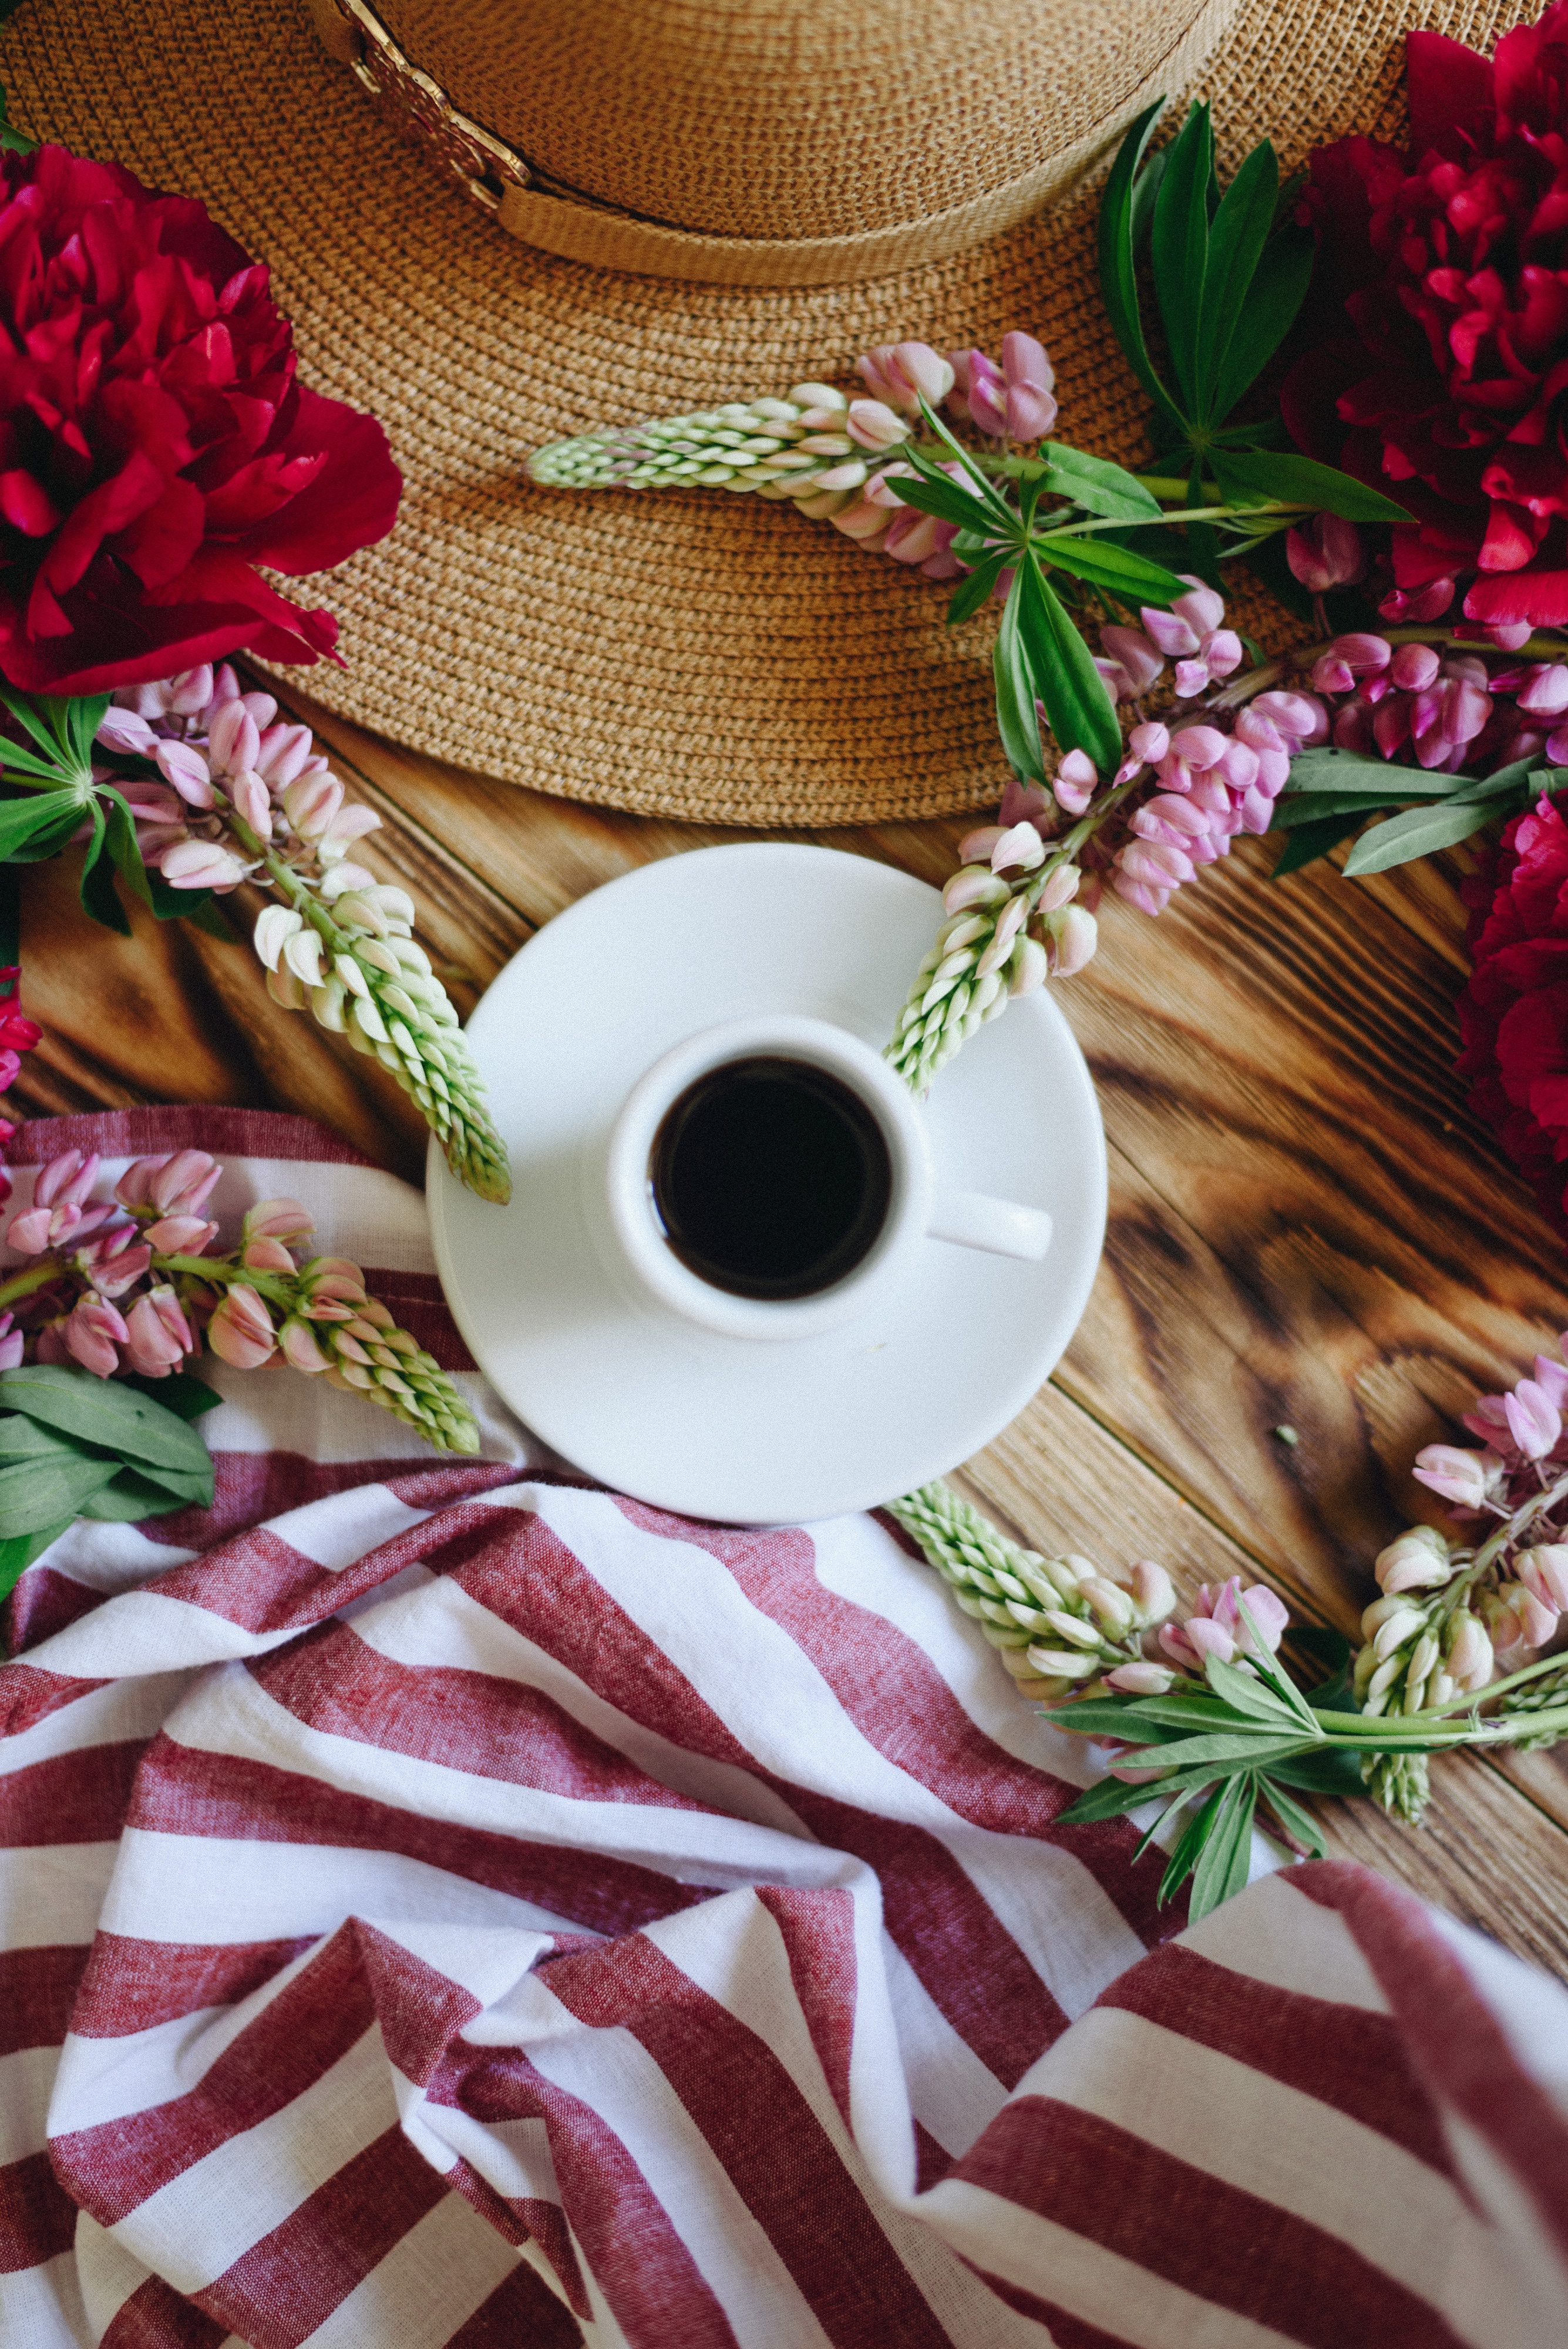 cup, hat, flowers, food, table wallpapers for tablet